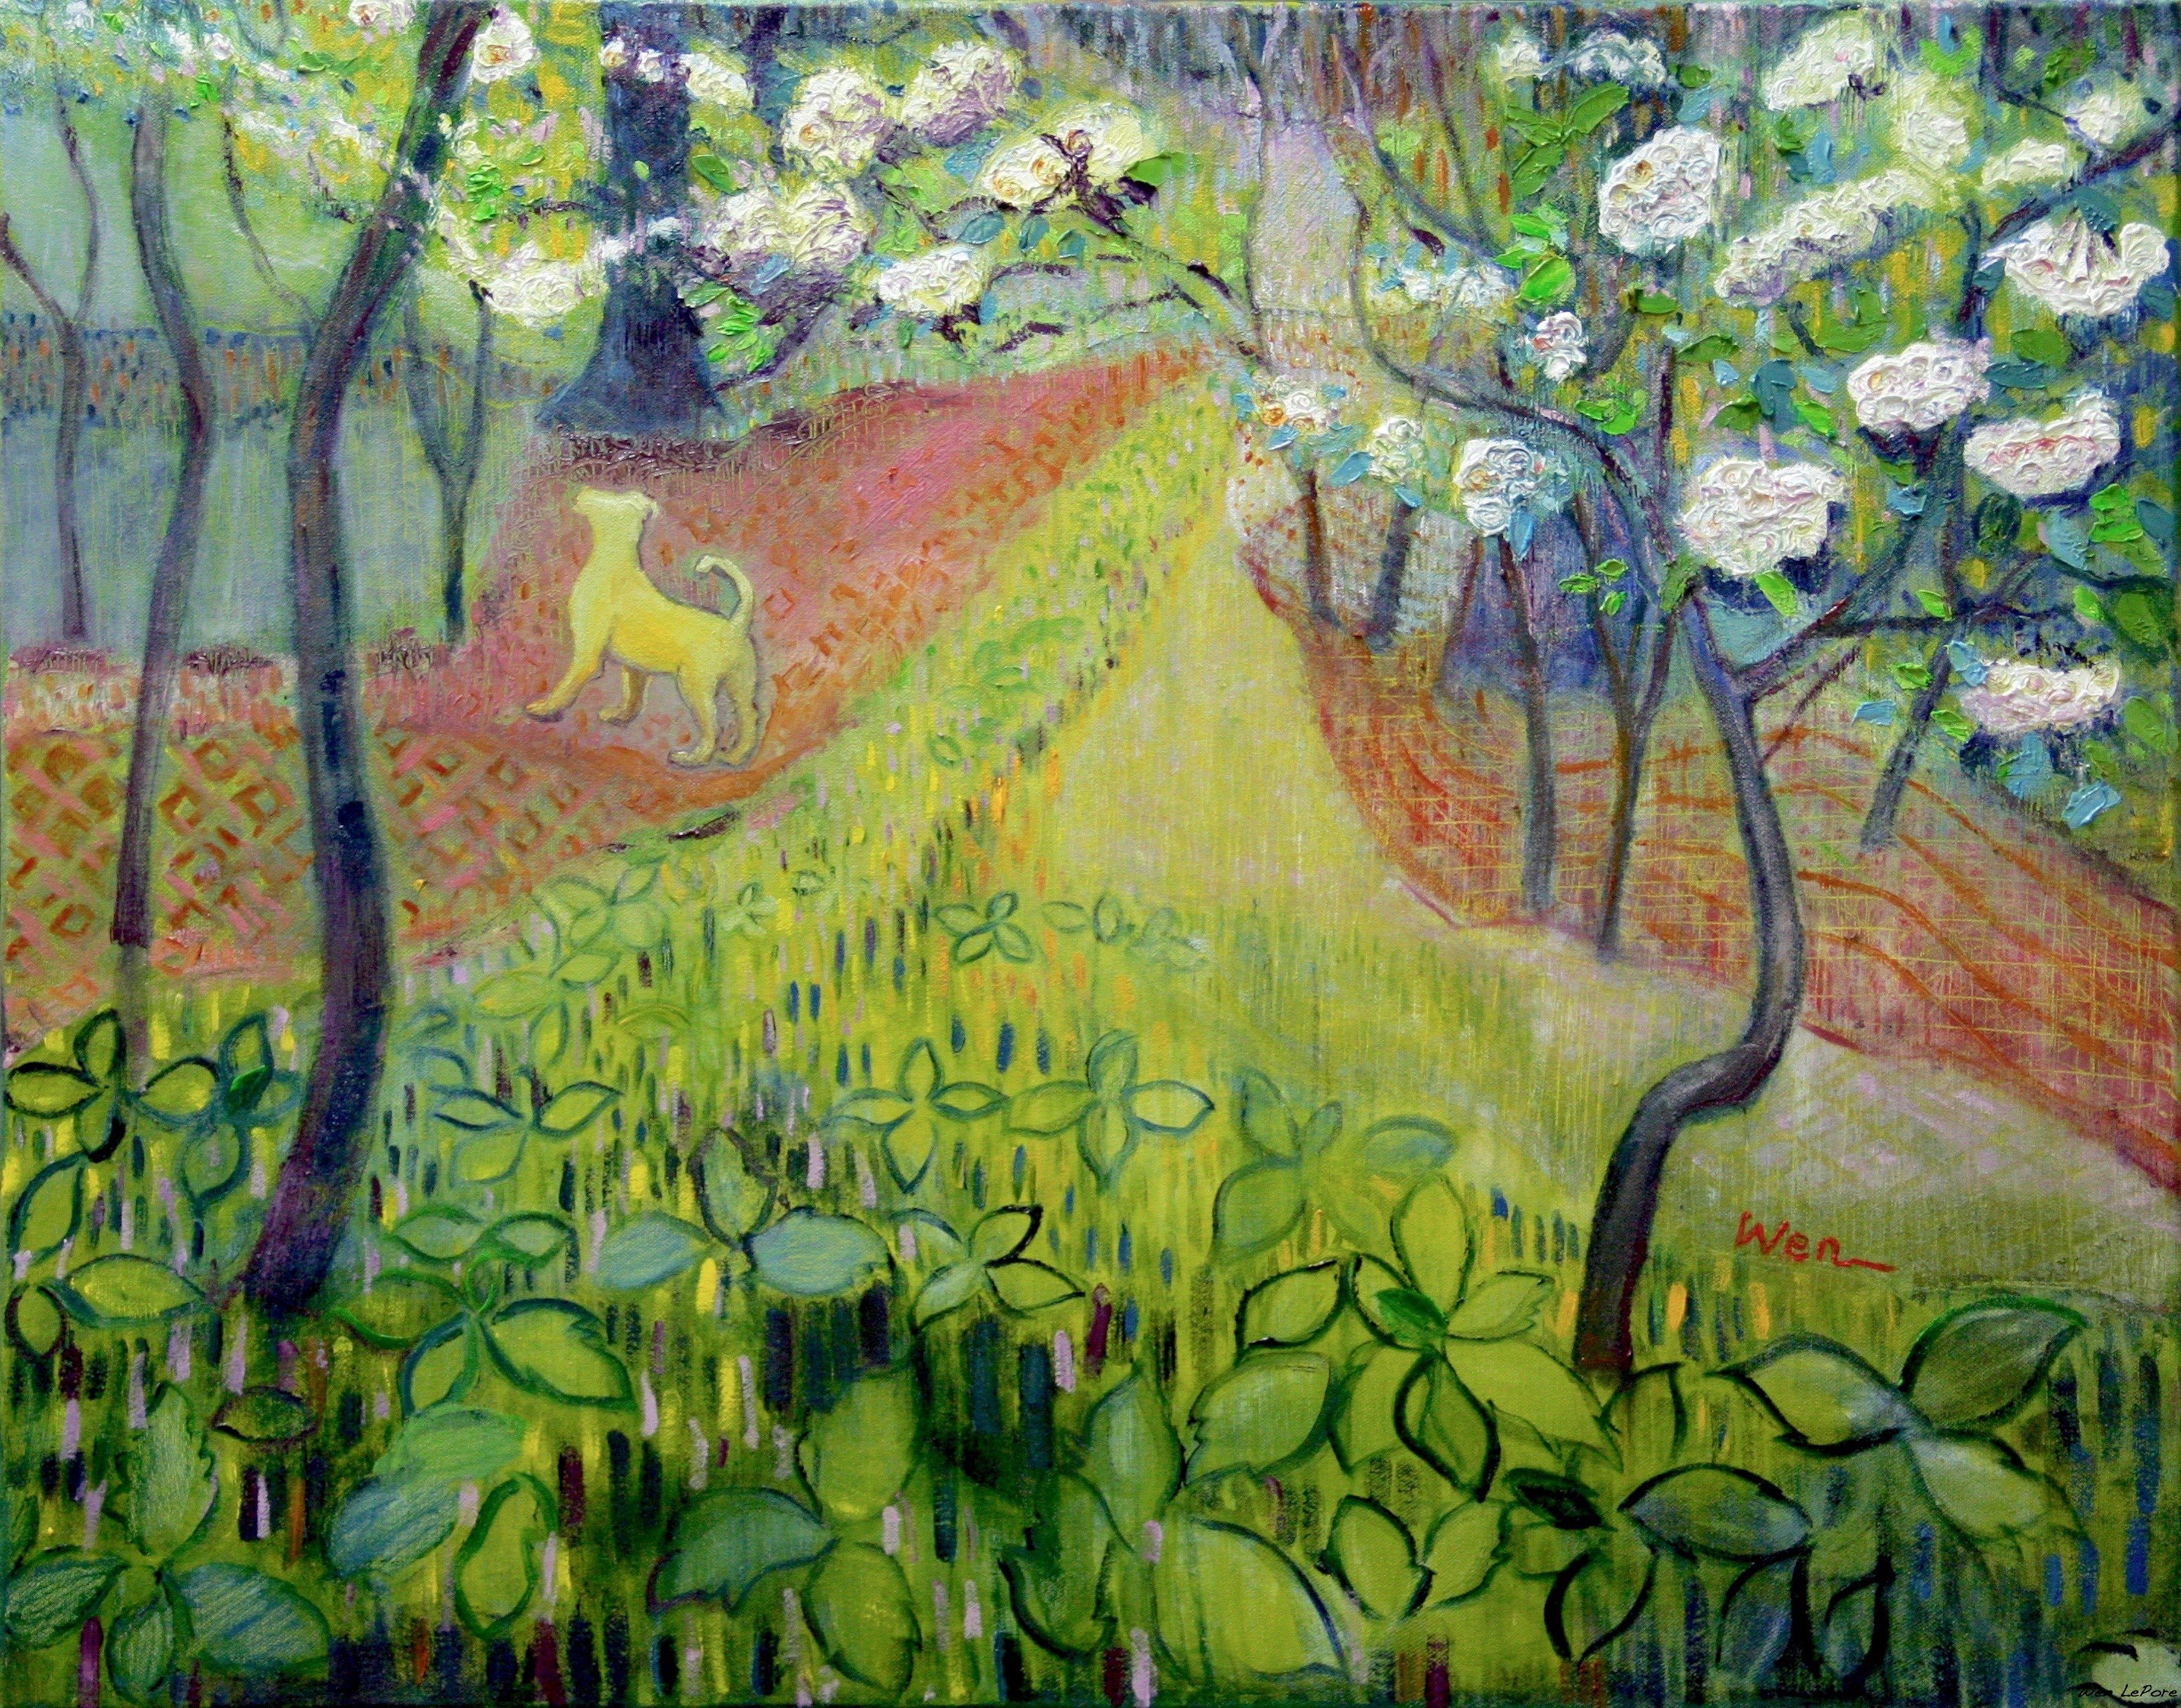 Mountain Laura Blossom at Monticello Paark
oil on canvas
24" x 30"